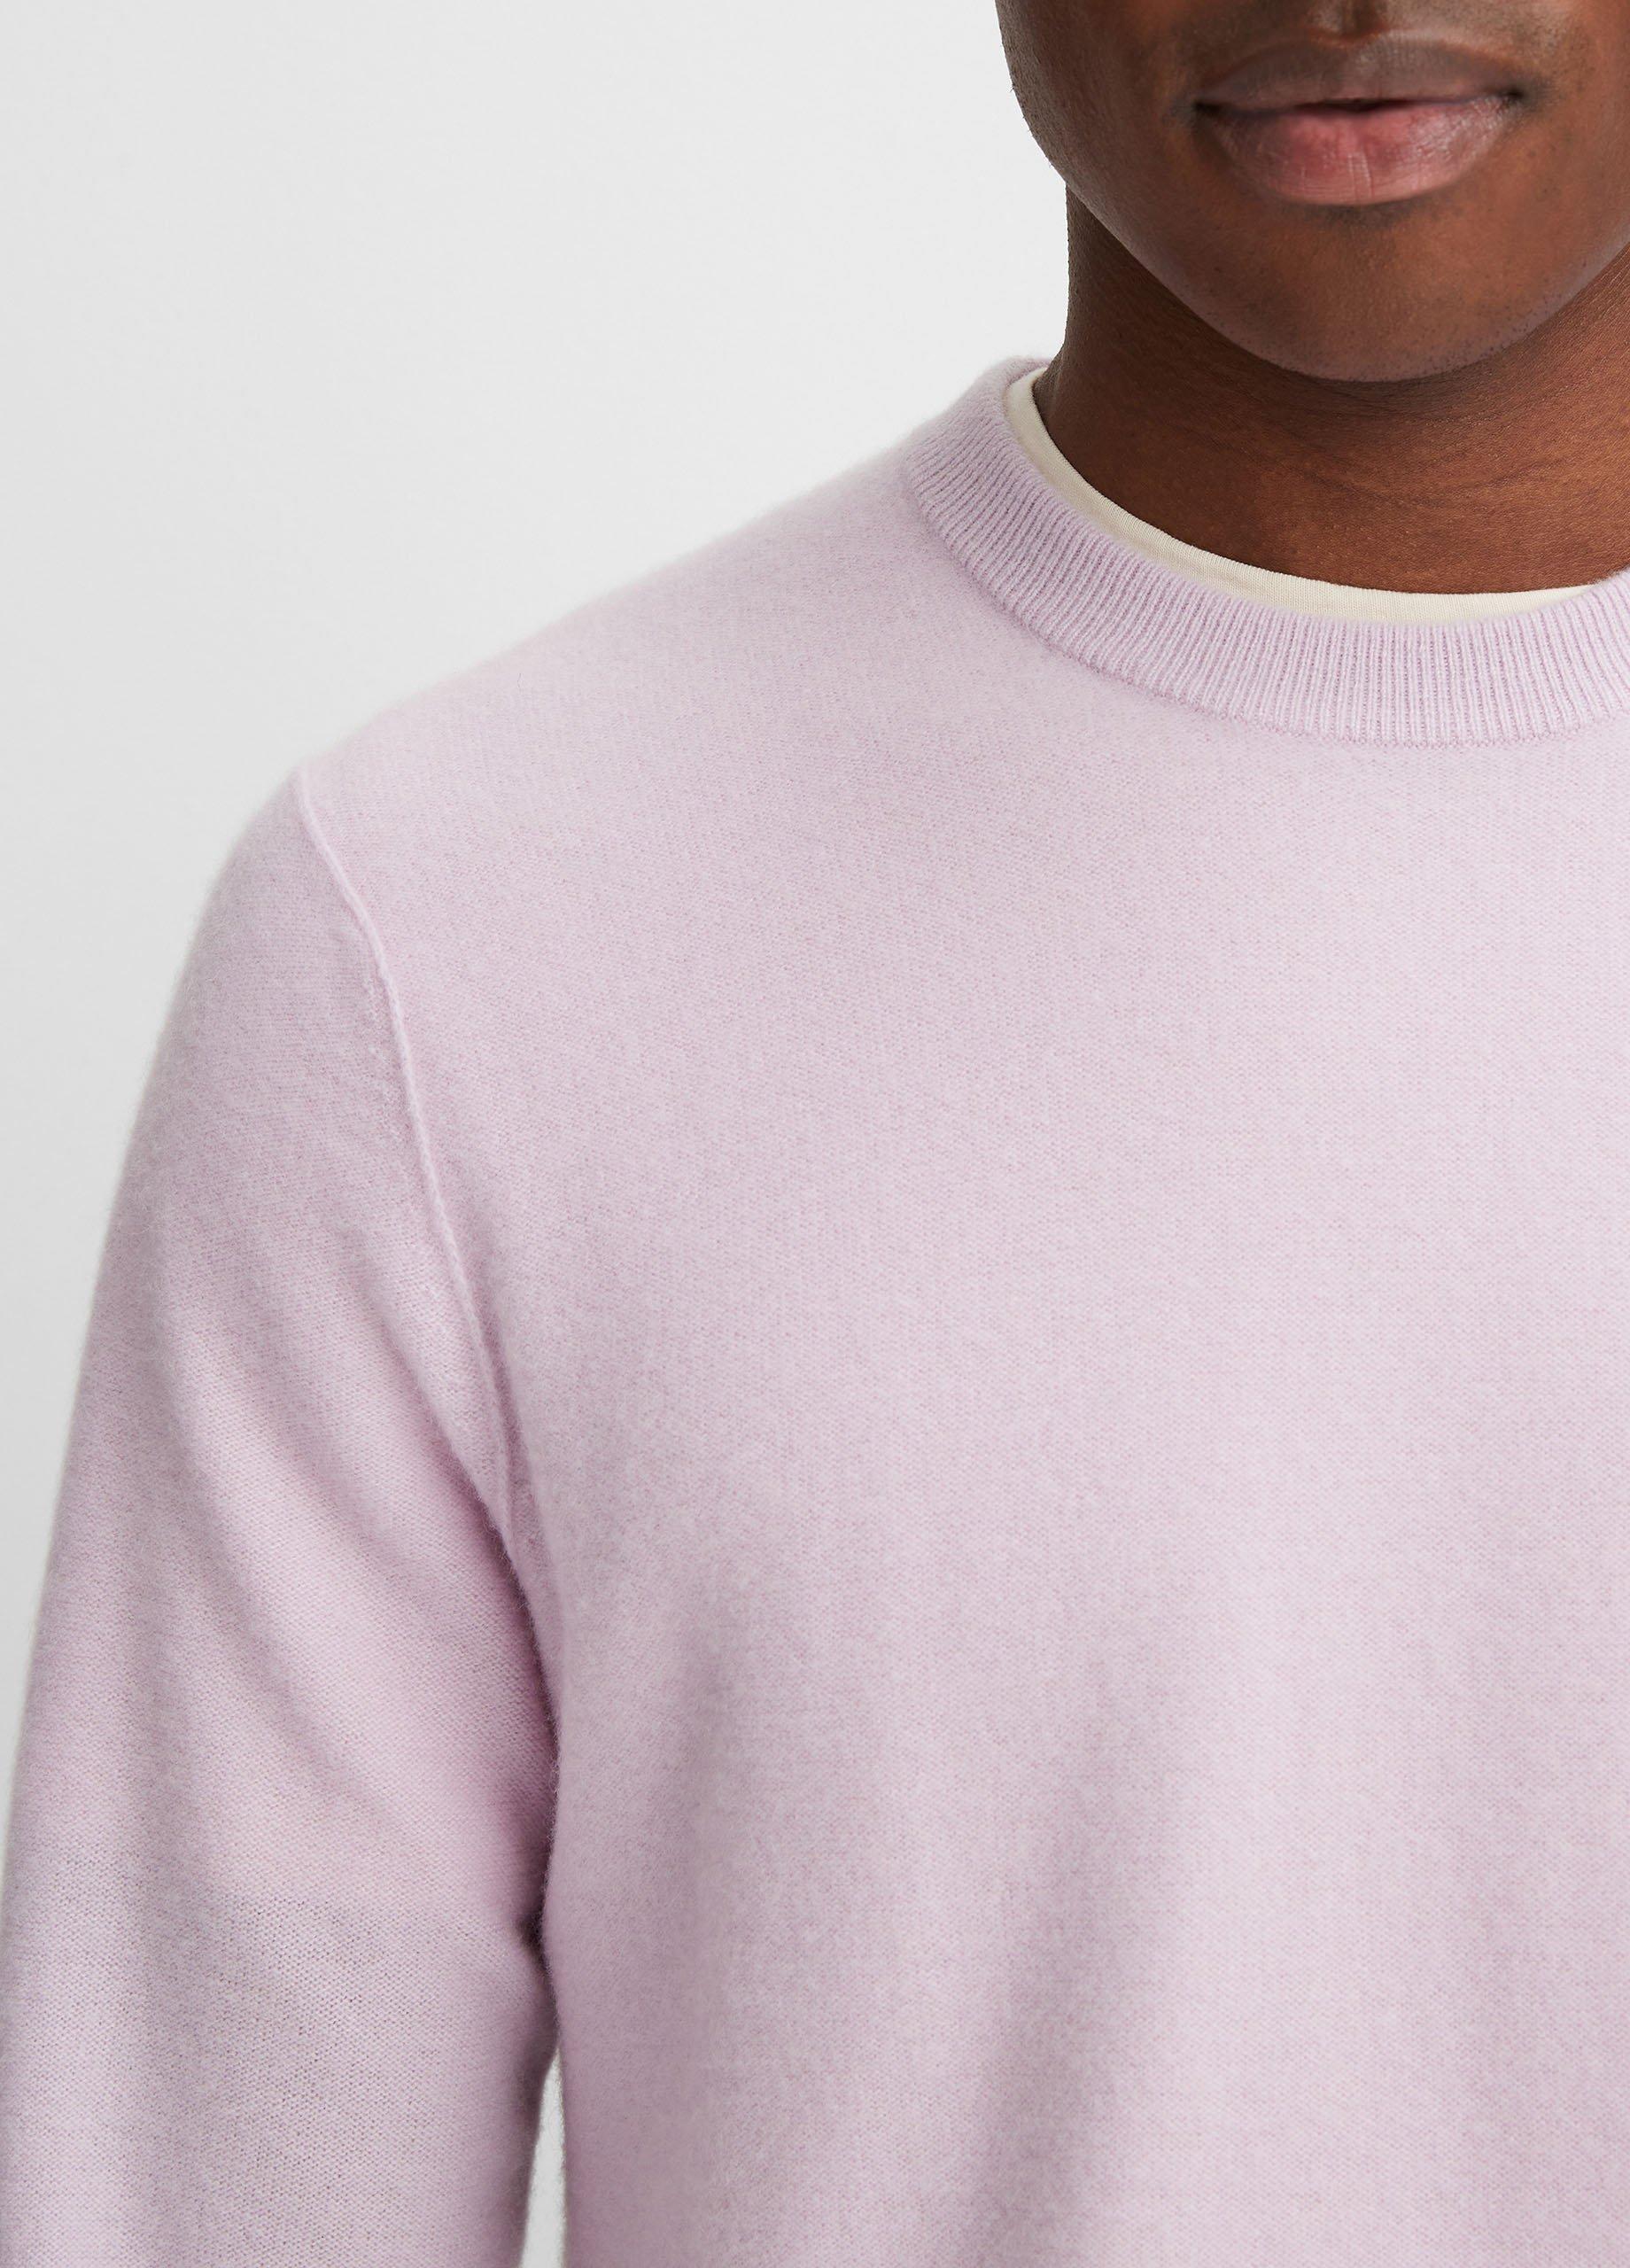 Plush Cashmere Crew Neck Sweater in Vince Products Men